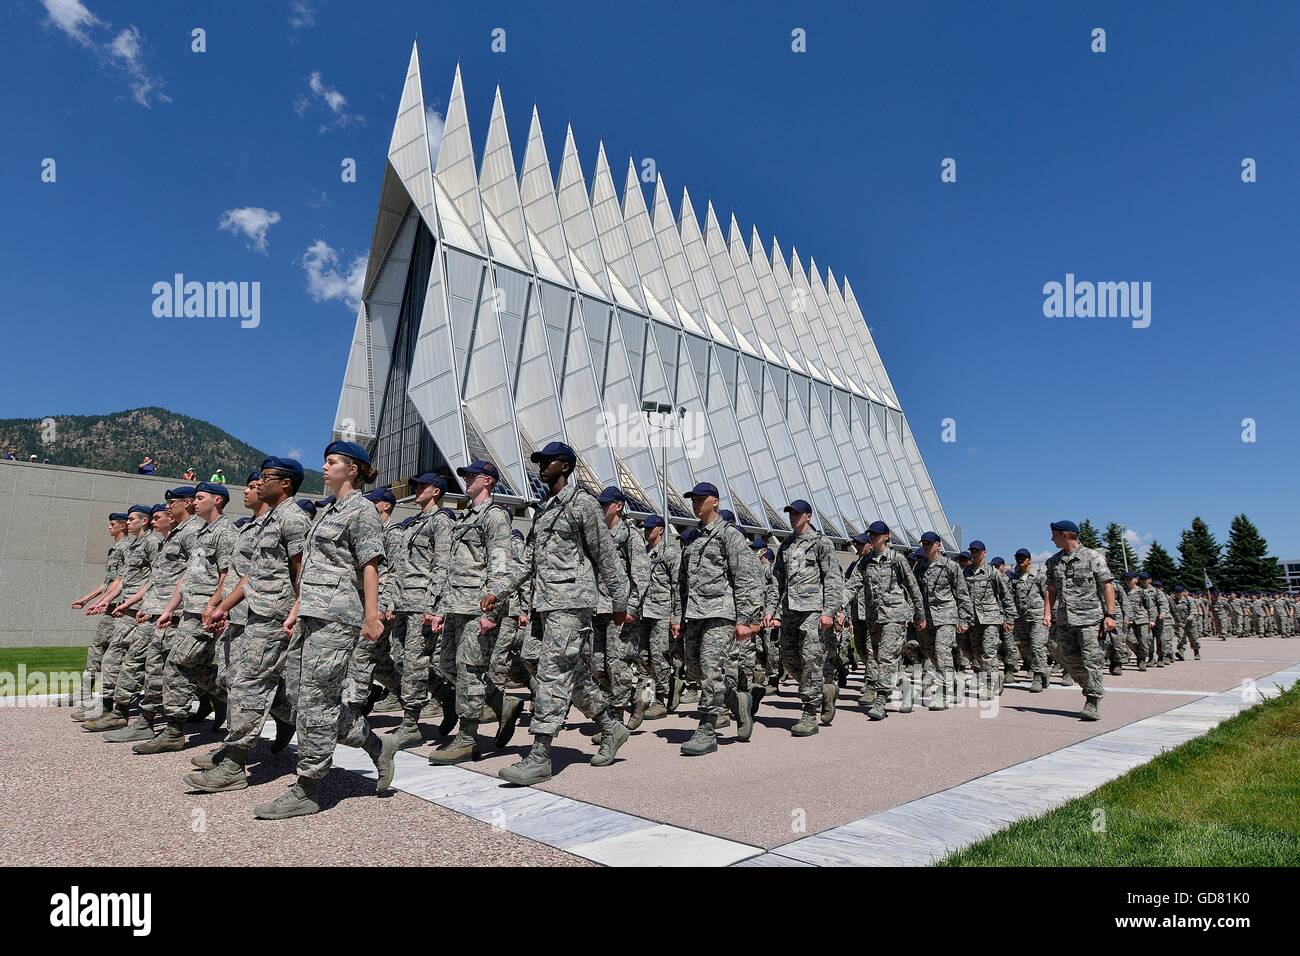 Incoming freshman students known as doolies march in formation past the chapel during lunch assembly during Basic Cadet Training at the U.S Air Force Academy July 8, 2016 in Colorado Springs, Colorado. The rigorous six-week Basic Cadet Training program acquaints cadets with military life before the start of the academic year. Stock Photo